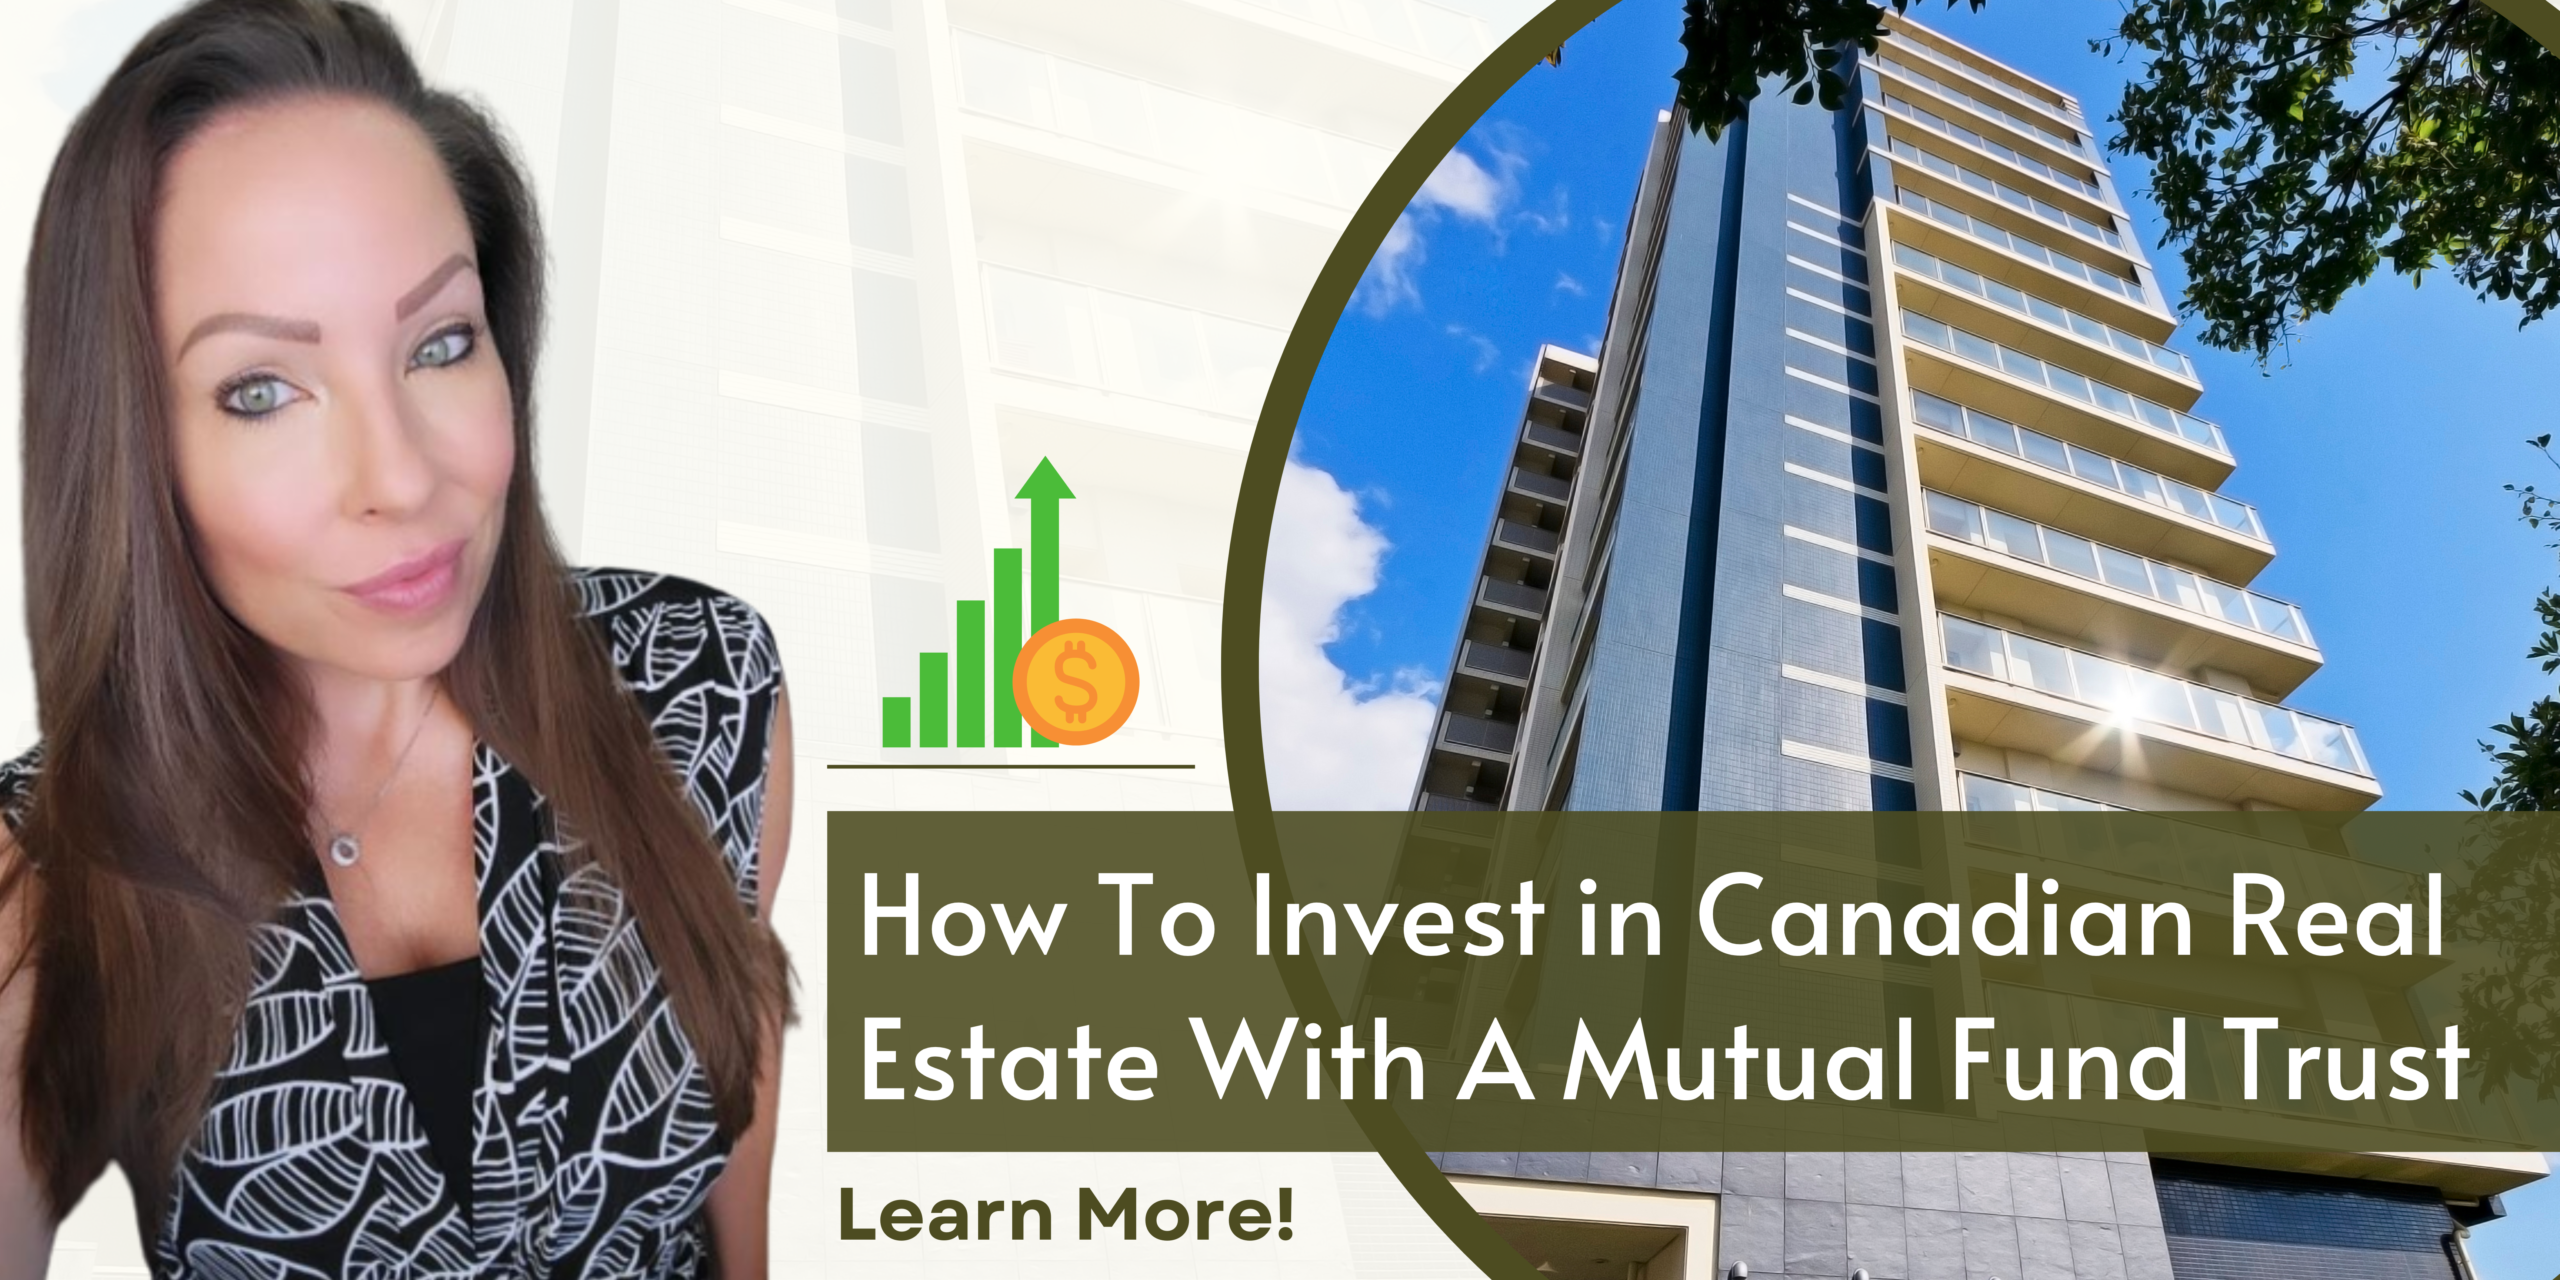 Investing in Canadian Real Estate